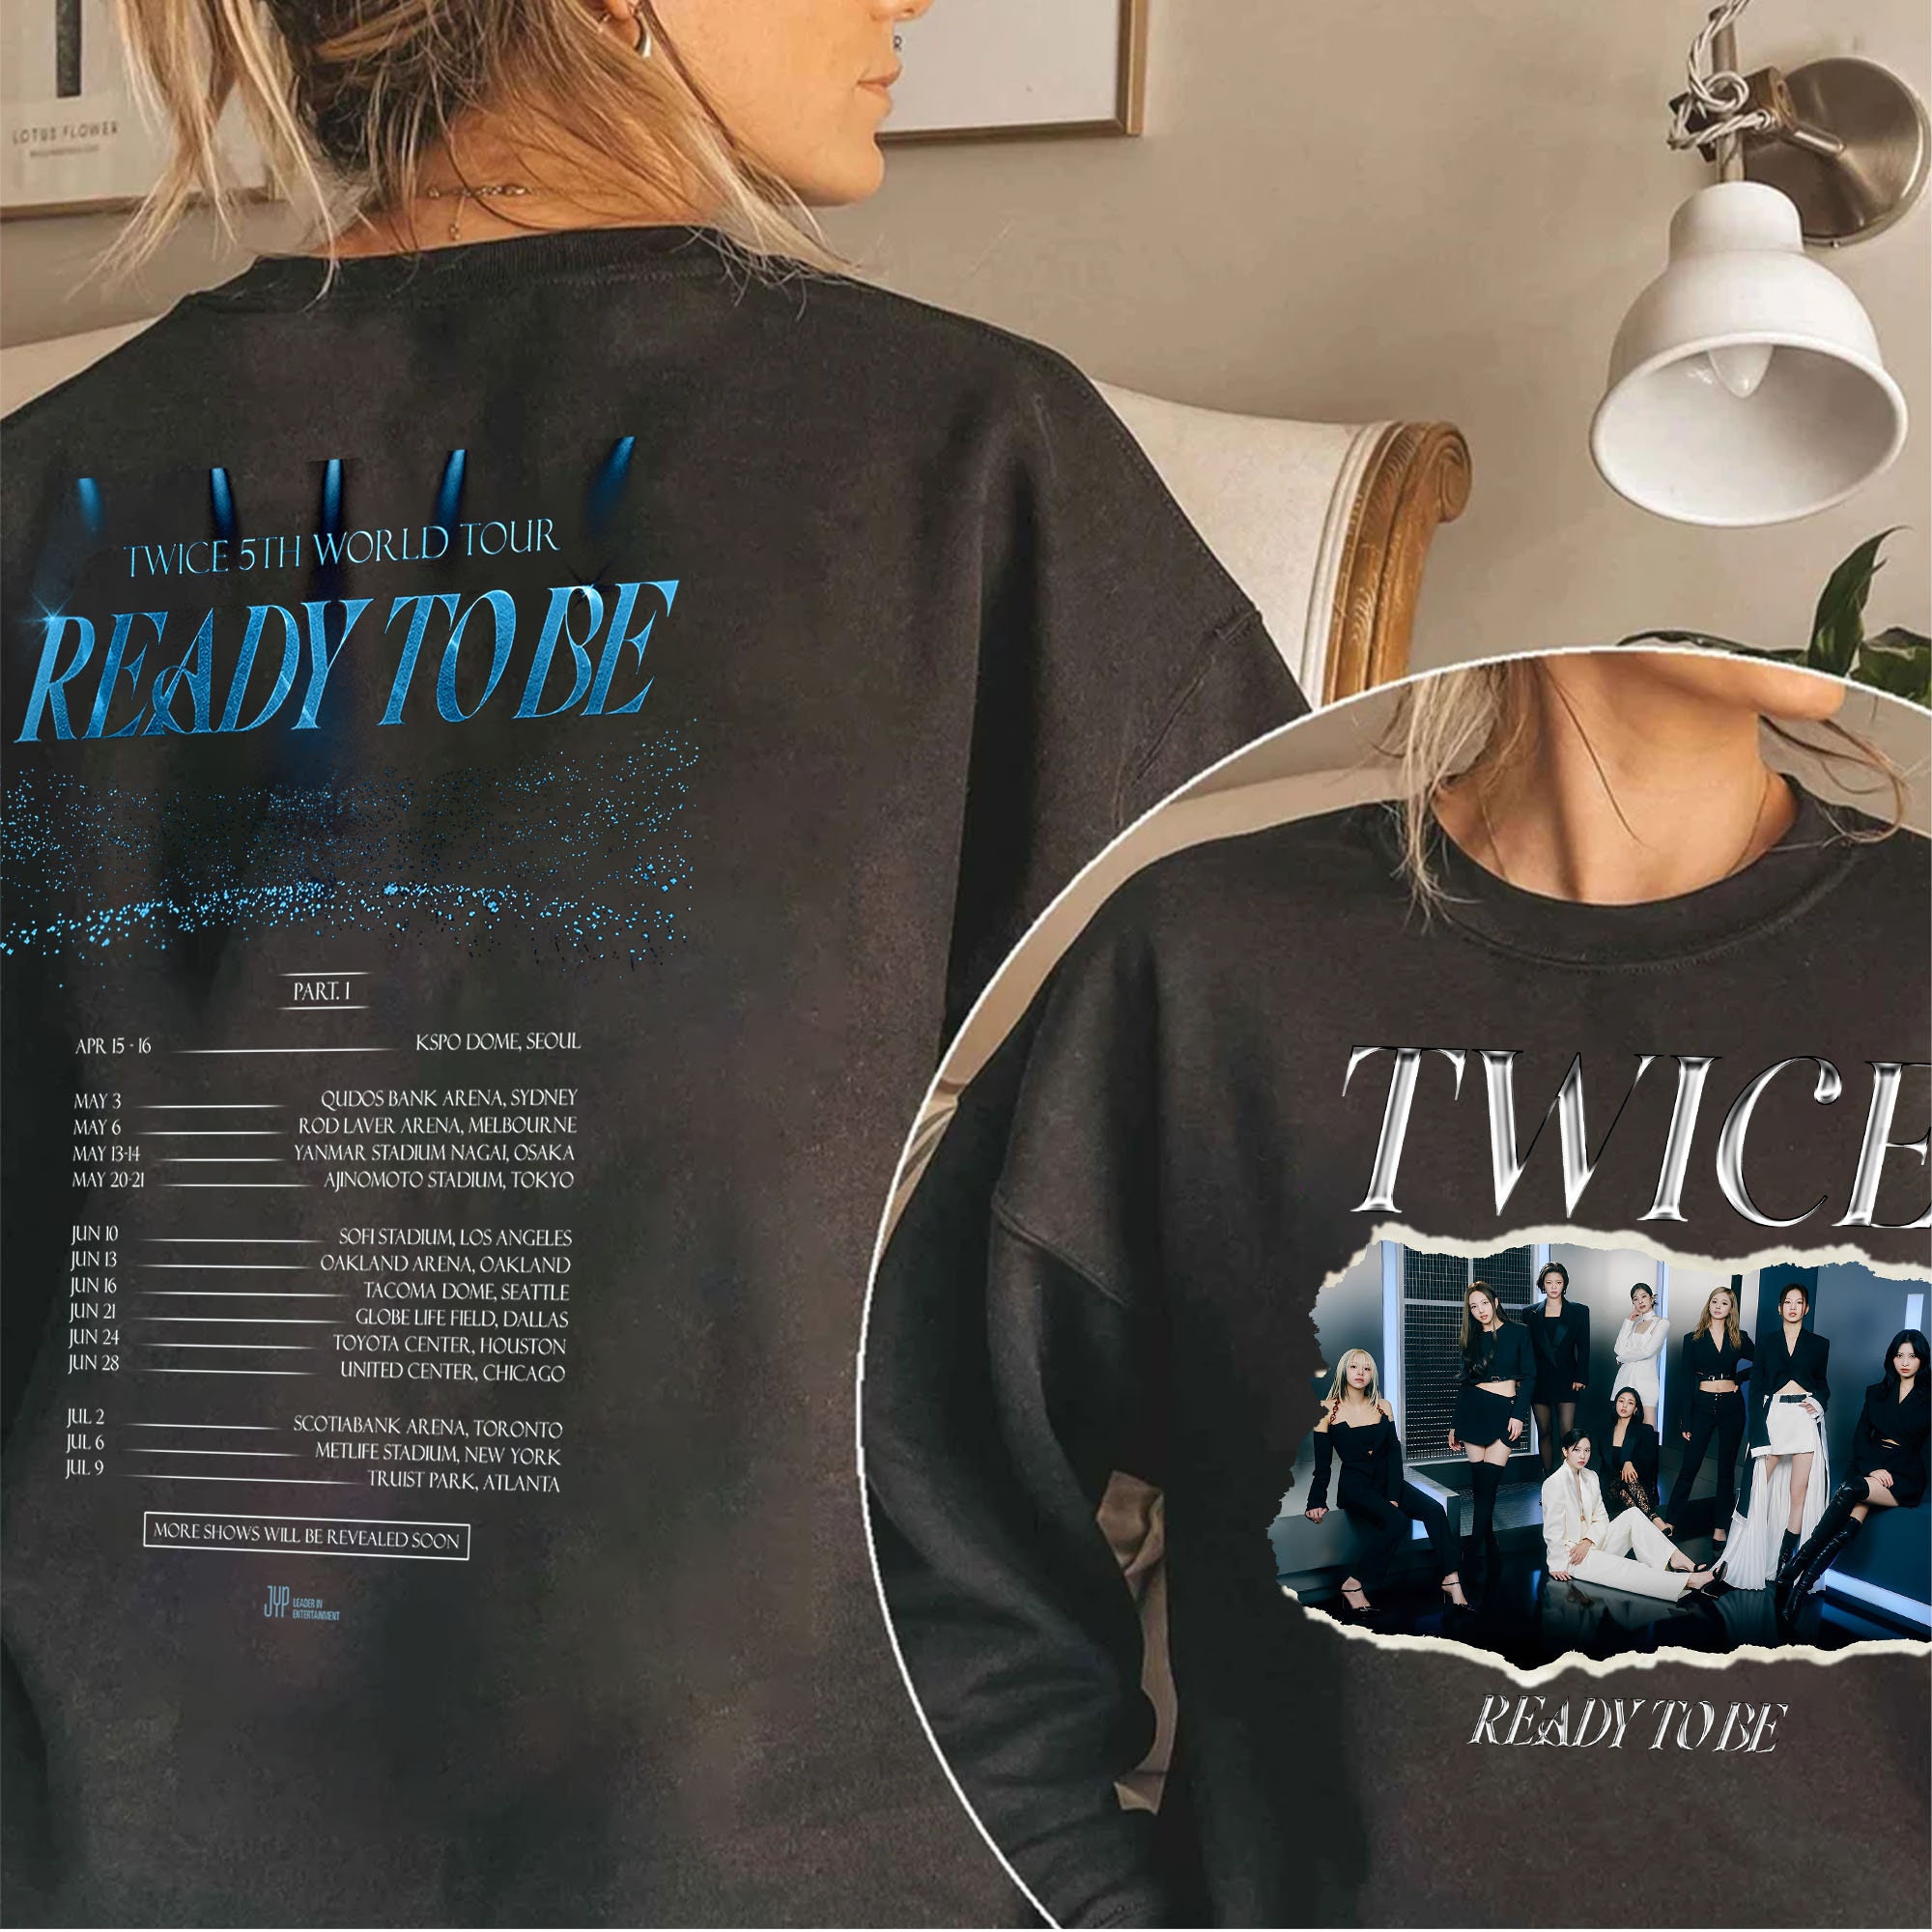 TWICE 5th World Tour READY TO BE US Heart T-shirt